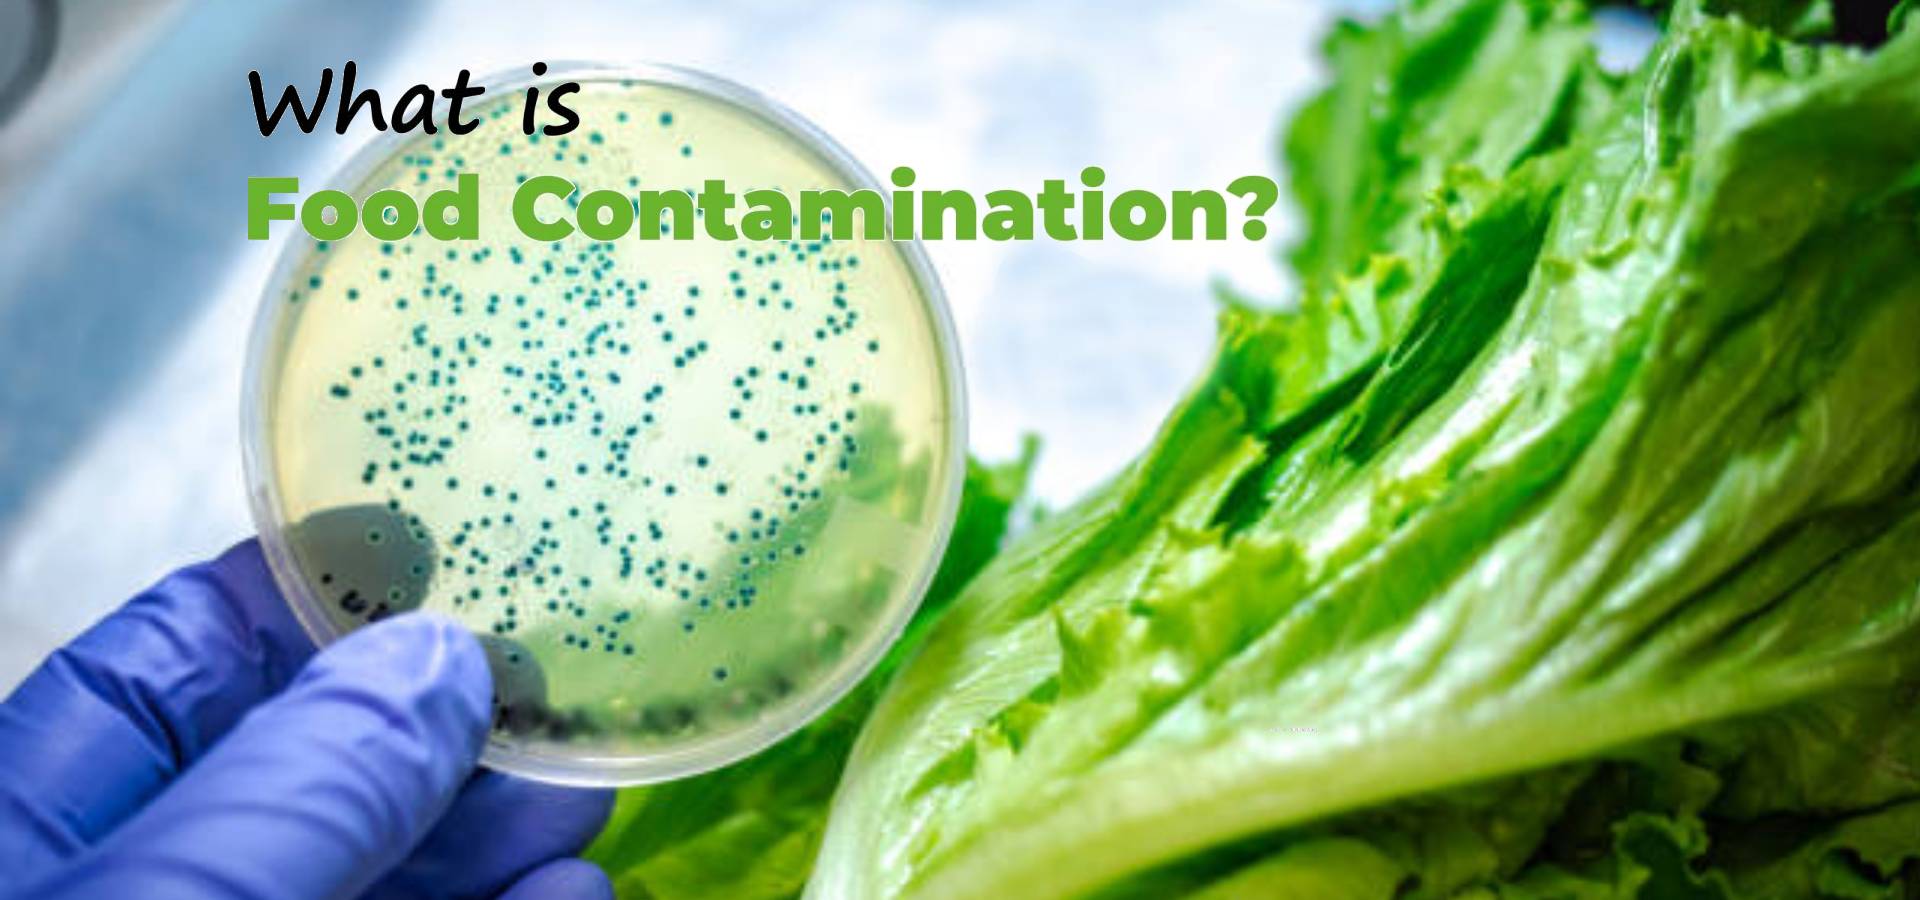 What is Food Contamination